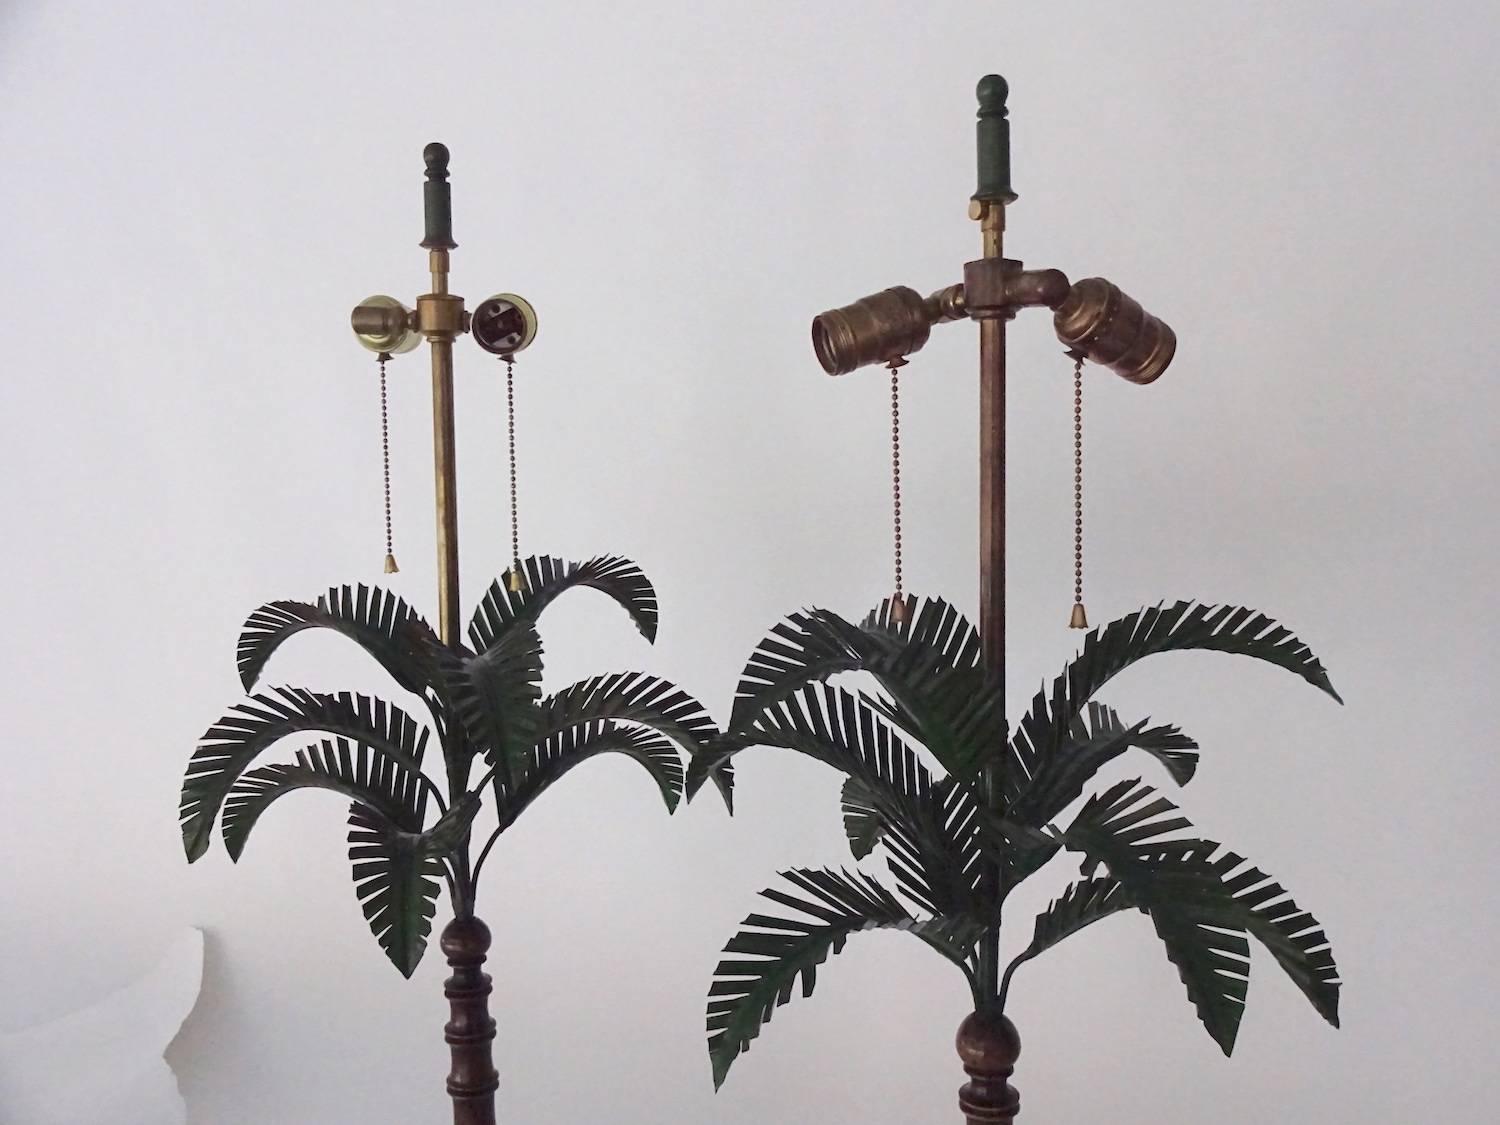 Pair of palm tree form tole peinte lamps. Green palm leaves atop turned
wooden mahogany bases in bamboo style. Most probably English. Ready to go,
new wiring and paint touch up make them just about perfect.